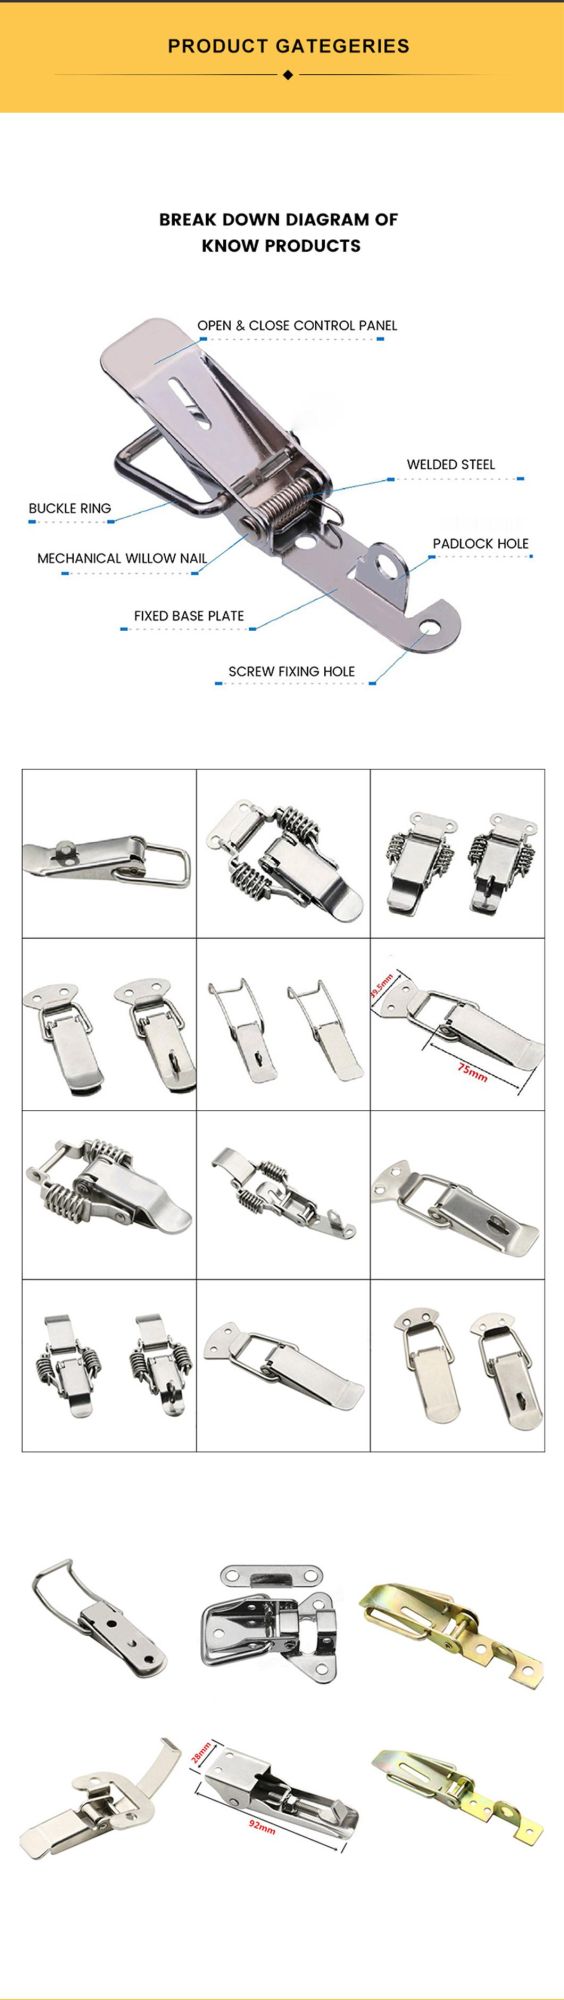 Spring Loaded Toggle Catch Lock Latch 90 Degree Toggle Latch Refrigerated Container Lock